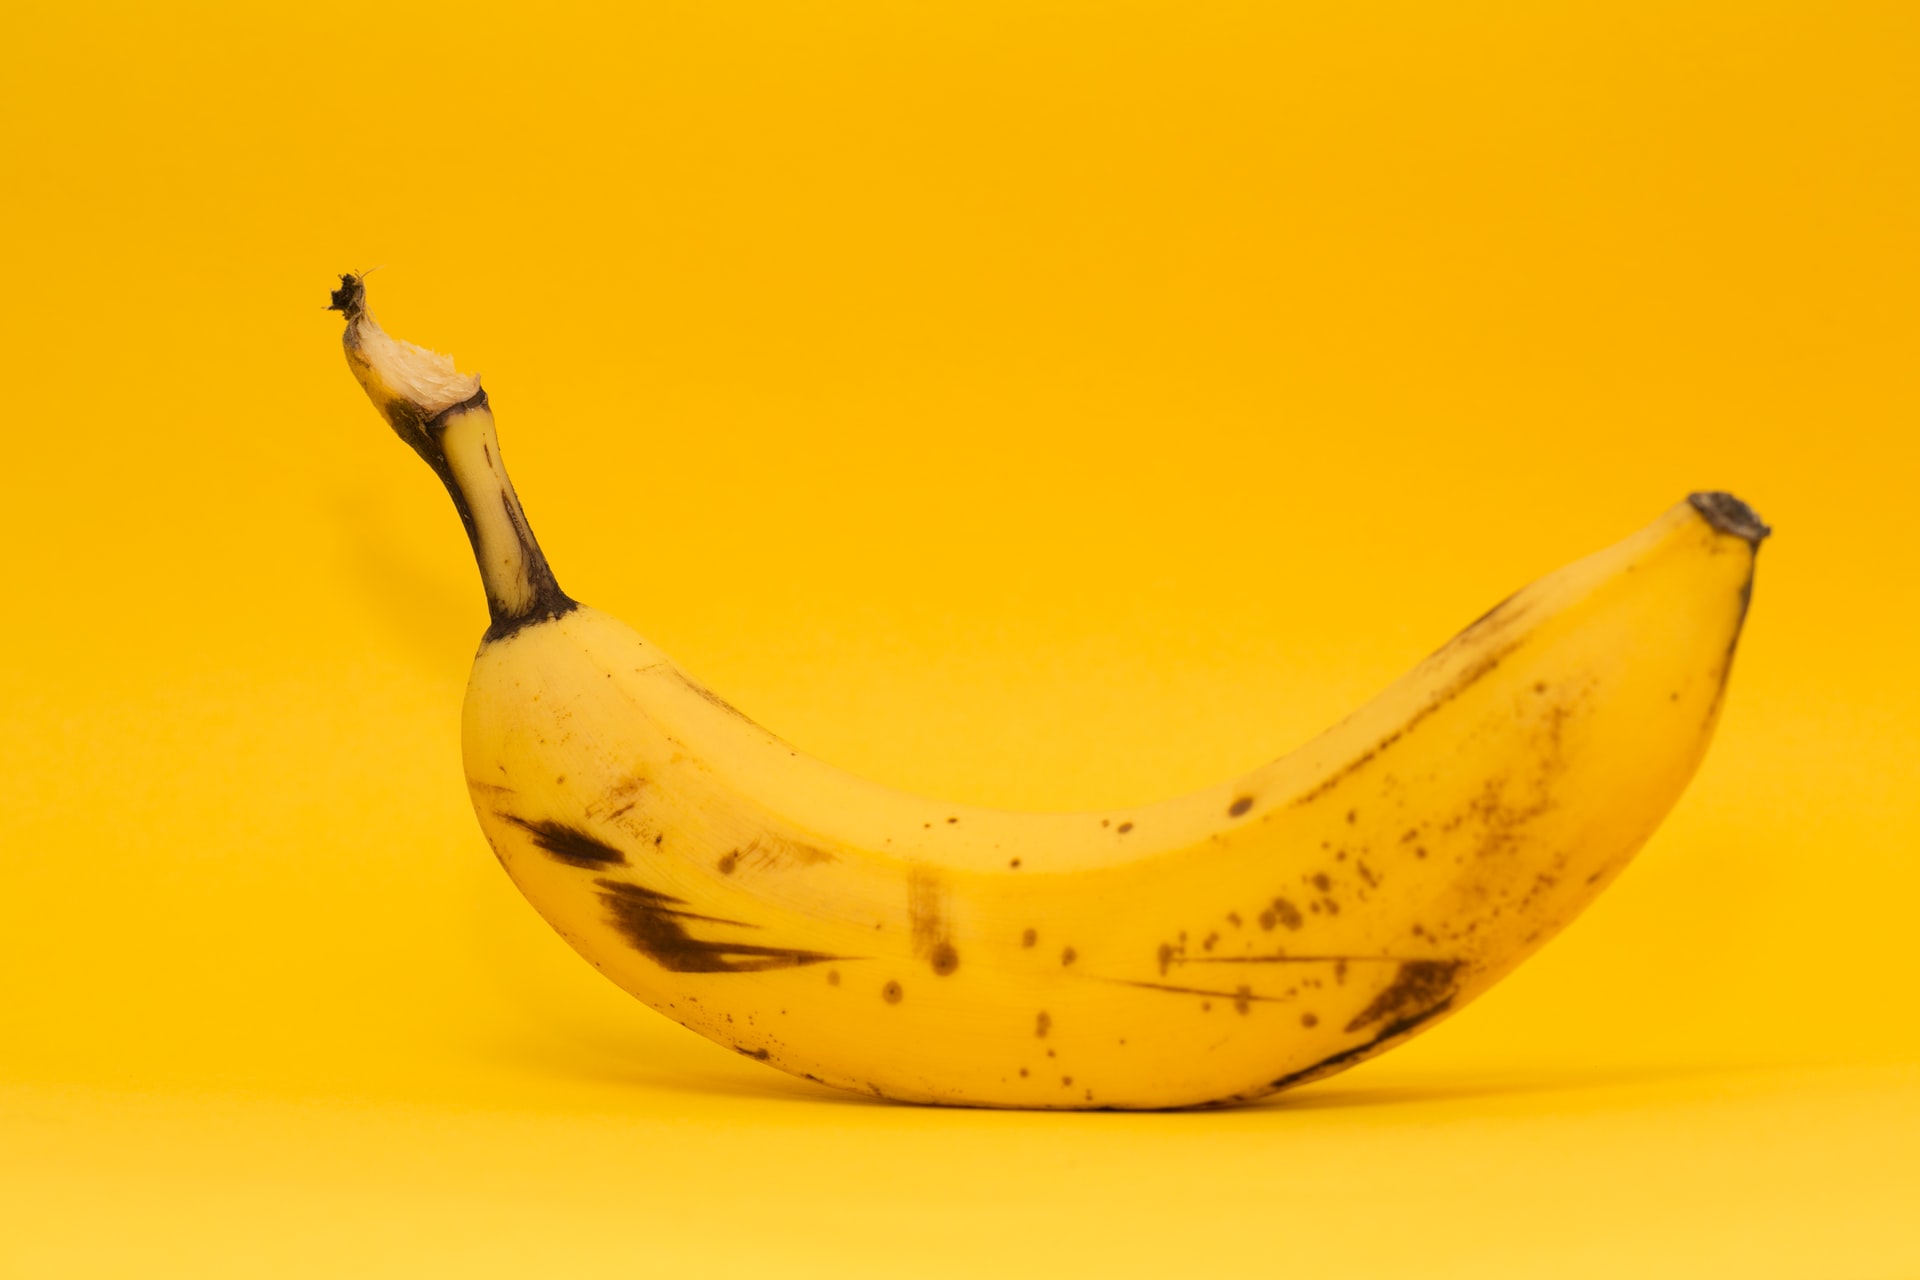 A ripe banana on a yellow background